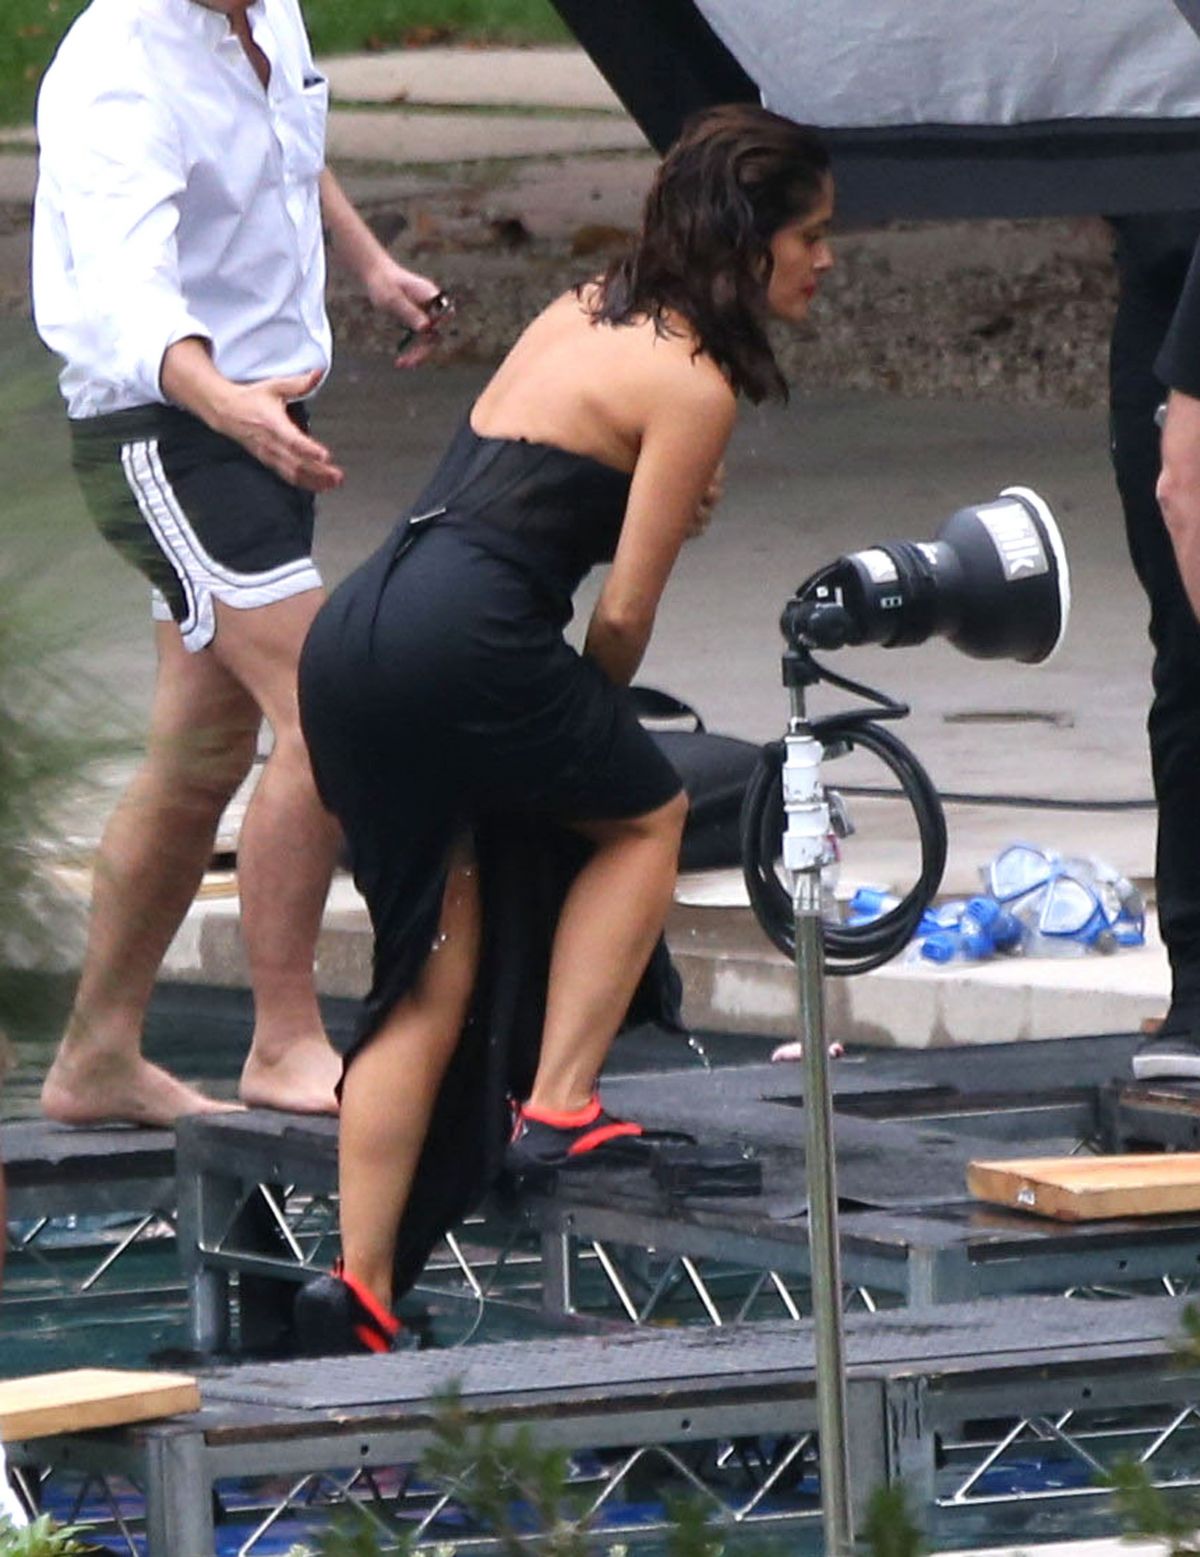 SALMA HAYEK on the Set of A Photoshoot in Los Angeles.